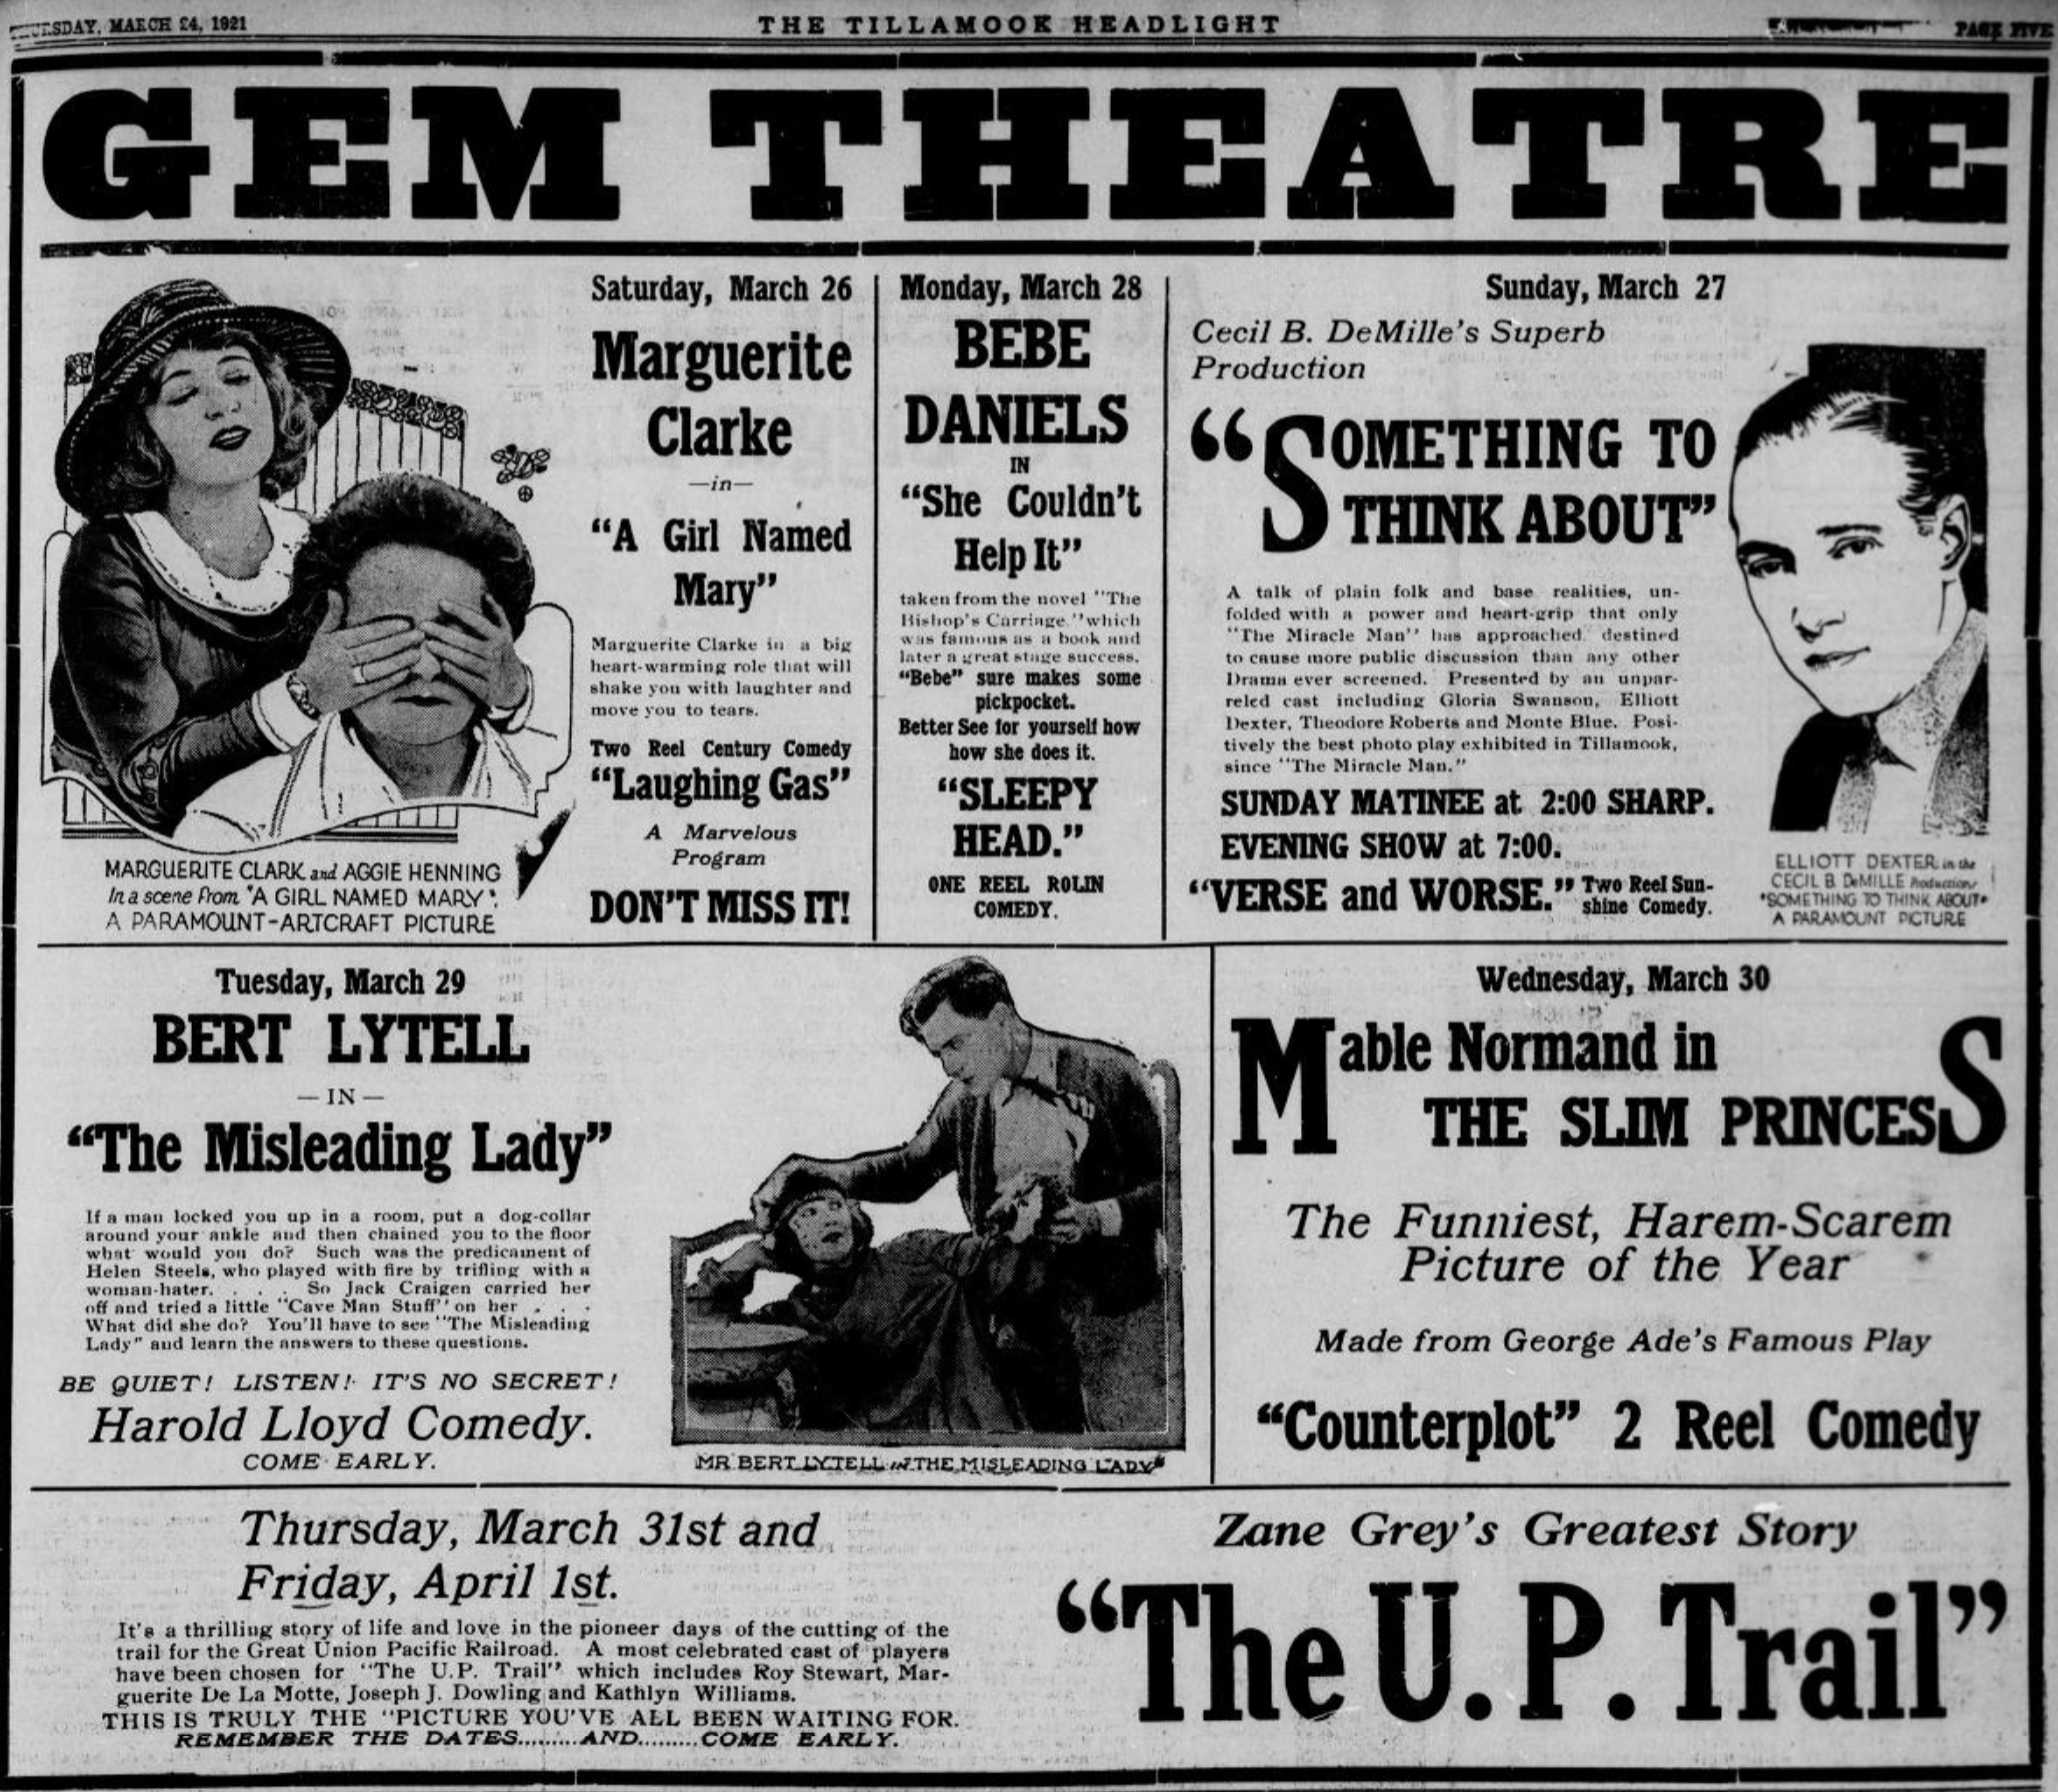 An ad for all the films showing at the Gem Theater in late March, 1921.